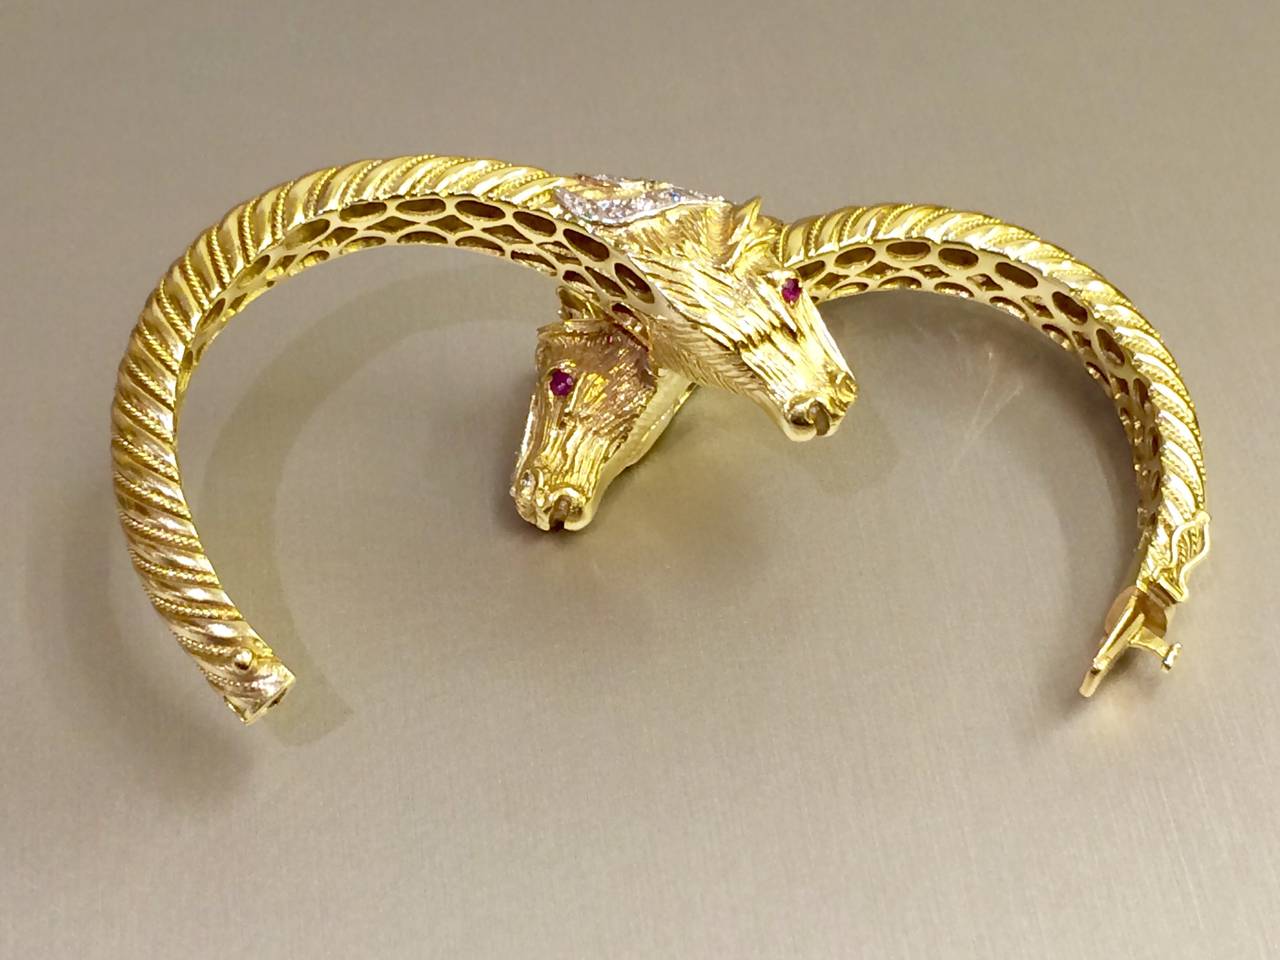 Open bangle in 18k yellow gold featuring two horse heads set with natural rubies and diamonds. Pre-Owned.